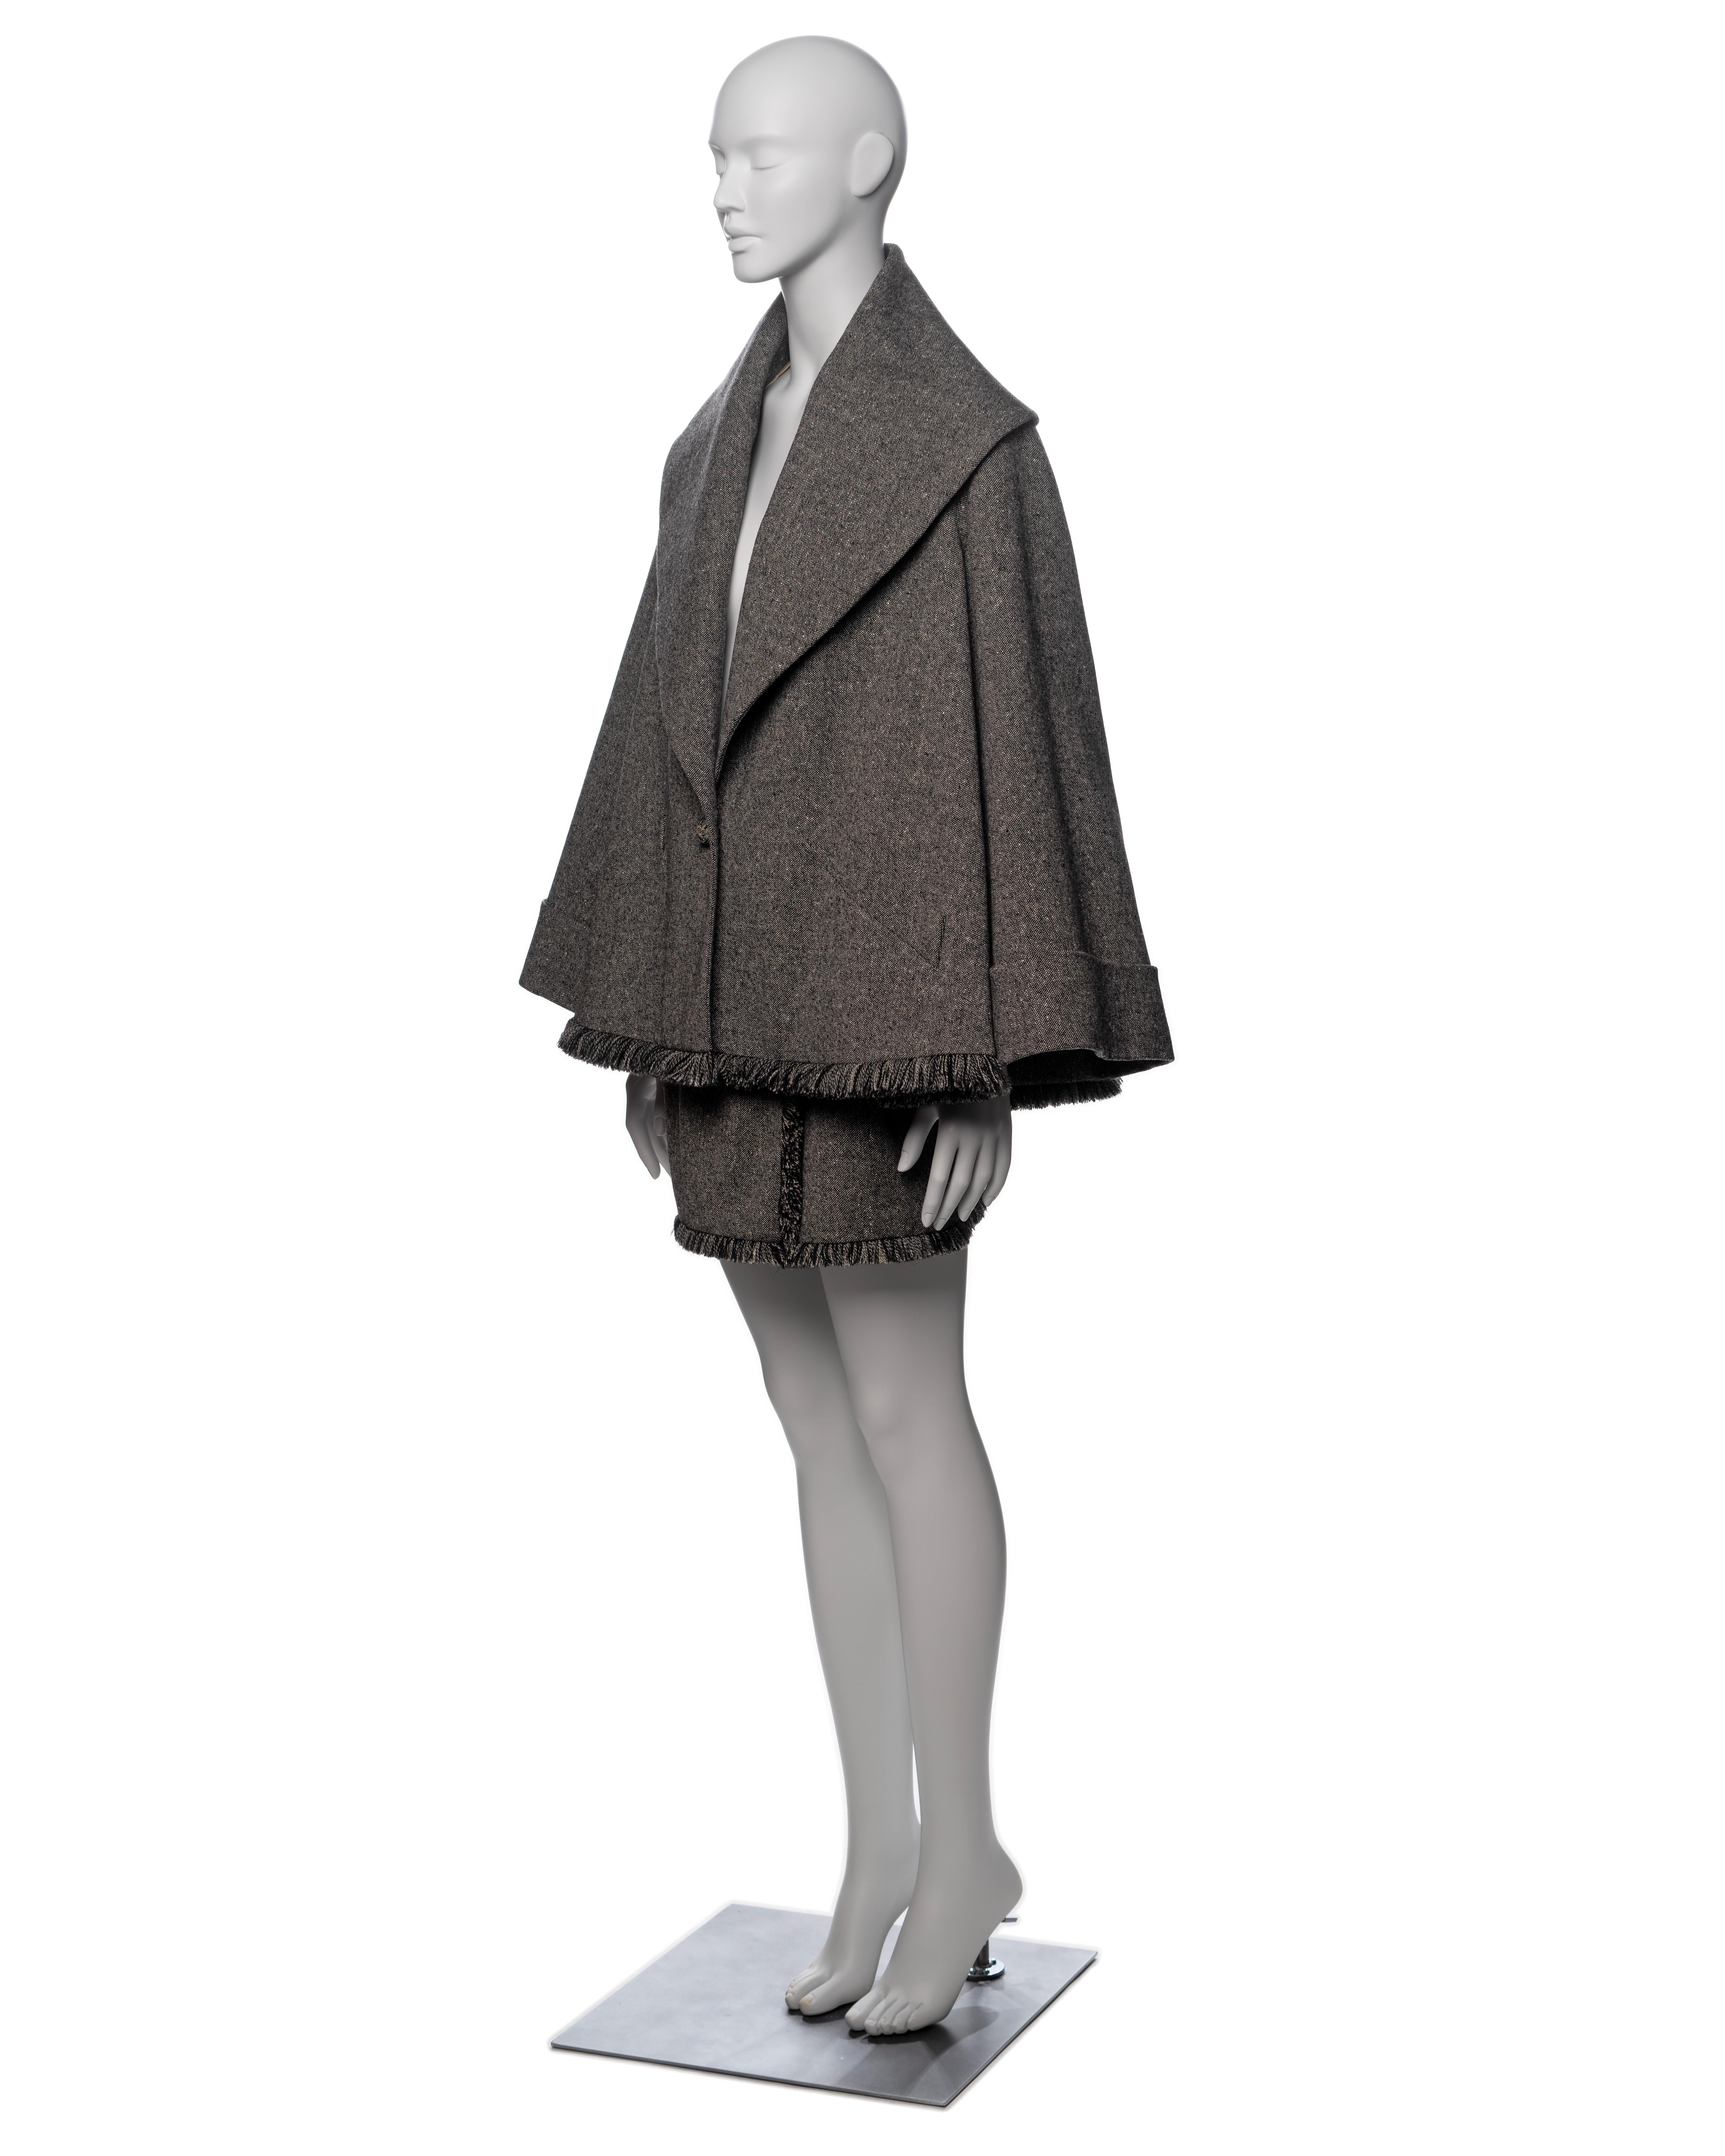 Christian Dior by John Galliano Grey Tweed Jacket and Mini Skirt Suit, FW 1998 For Sale 1